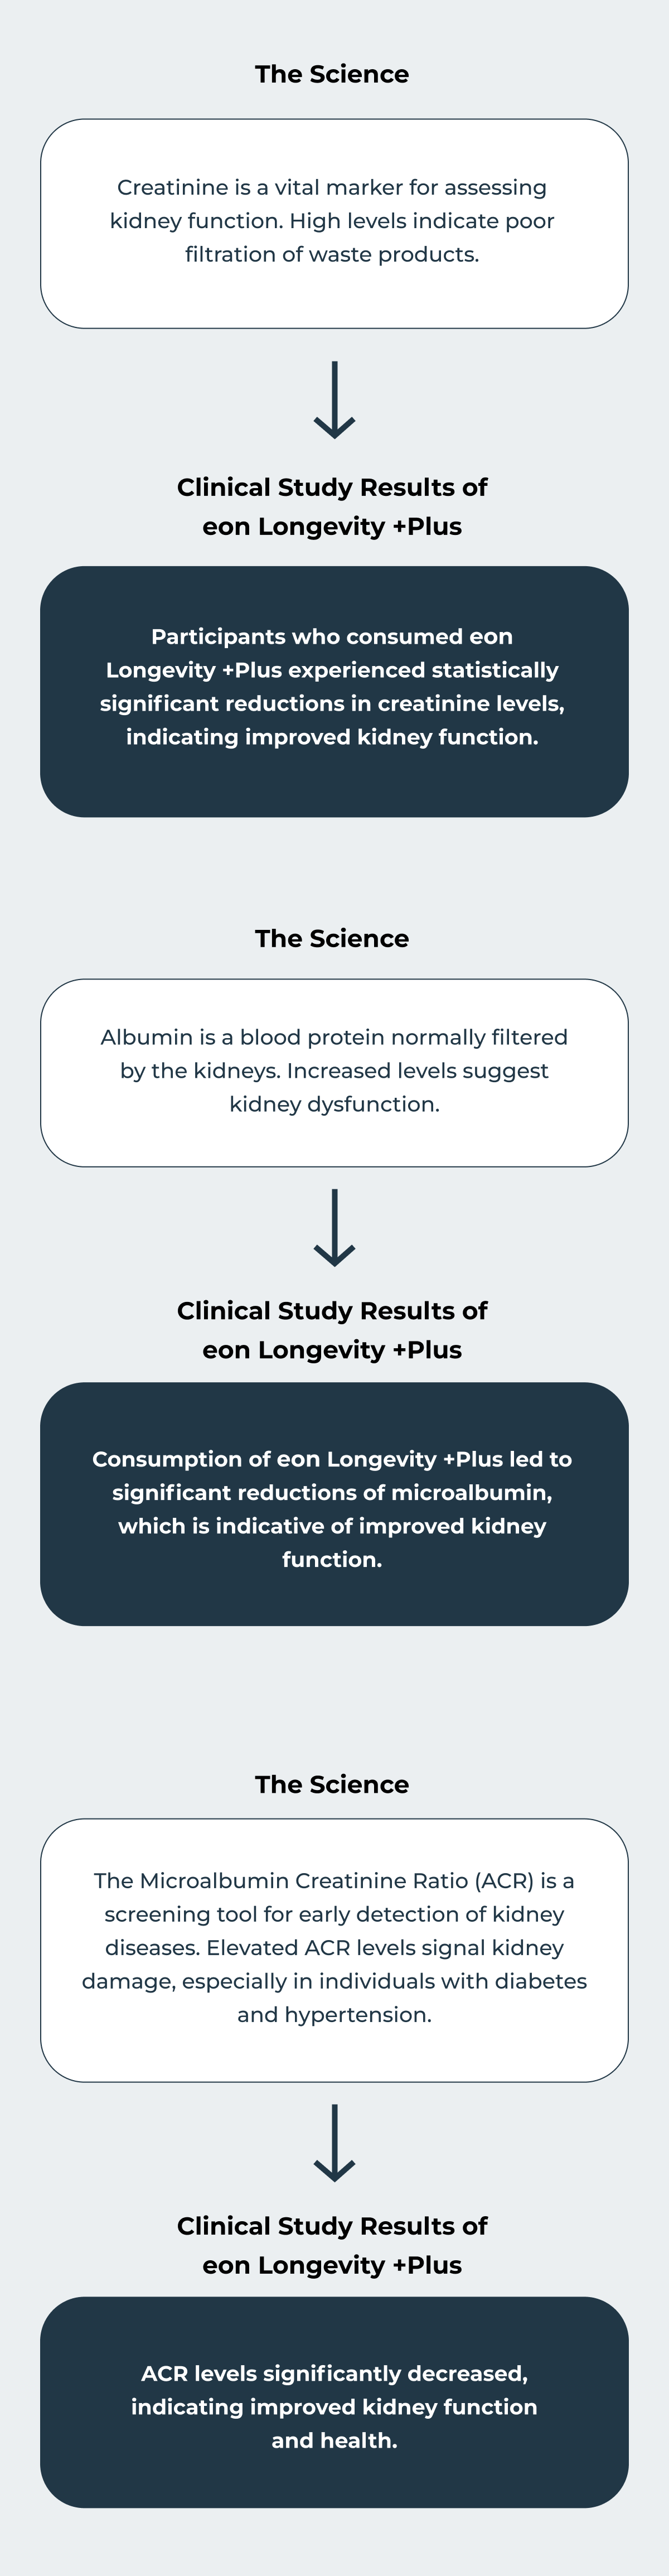 The Science → Clinical Study Results of eon Longevity +Plus  Creatinine is a vital marker for assessing kidney function. High levels indicate poor filtration of waste products. → Participants who consumed eon Longevity +Plus experienced statistically significant reductions in creatinine levels, indicating improved kidney function.  Albumin is a blood protein normally filtered by the kidneys. Increased levels suggest kidney dysfunction. → Consumption of eon Longevity +Plus led to significant reductions of microalbumin, which is indicative of improved kidney function.  The Microalbumin Creatinine Ratio (ACR) is a screening tool for early detection of kidney diseases. Elevated ACR levels signal kidney damage, especially in individuals with diabetes and hypertension. → ACR levels significantly decreased, indicating improved kidney function and health.  CLICK BUTTON: READ THE CLINICAL STUDY